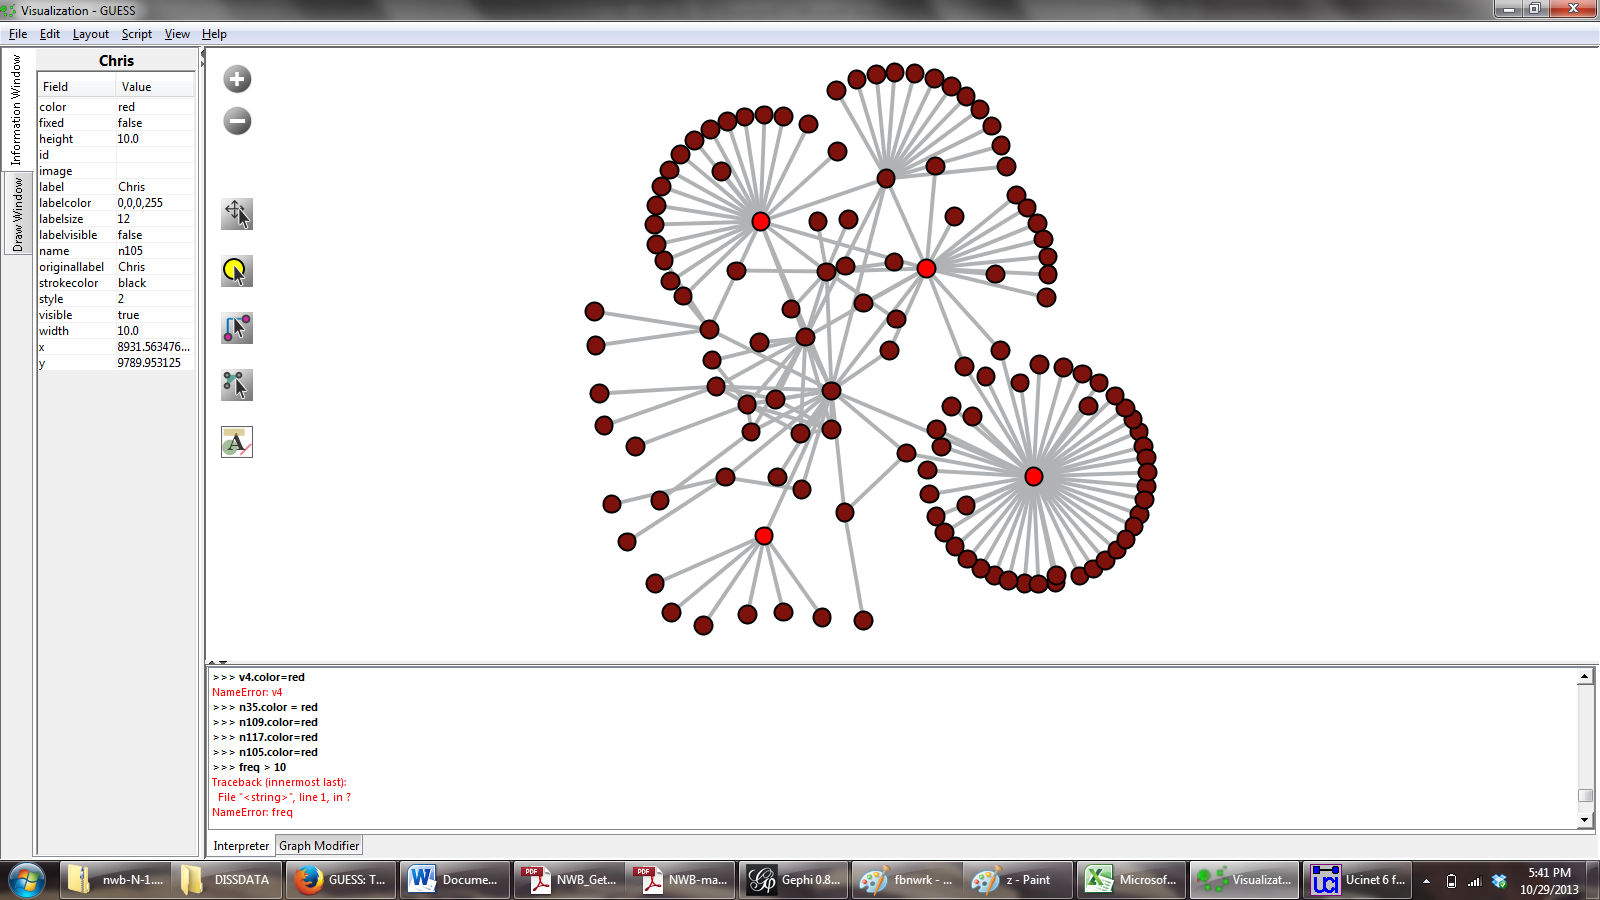 shot of a network image, with some of the nodes colored red, and a script bar at the bottom, with Gython code which is specific to GUESS software